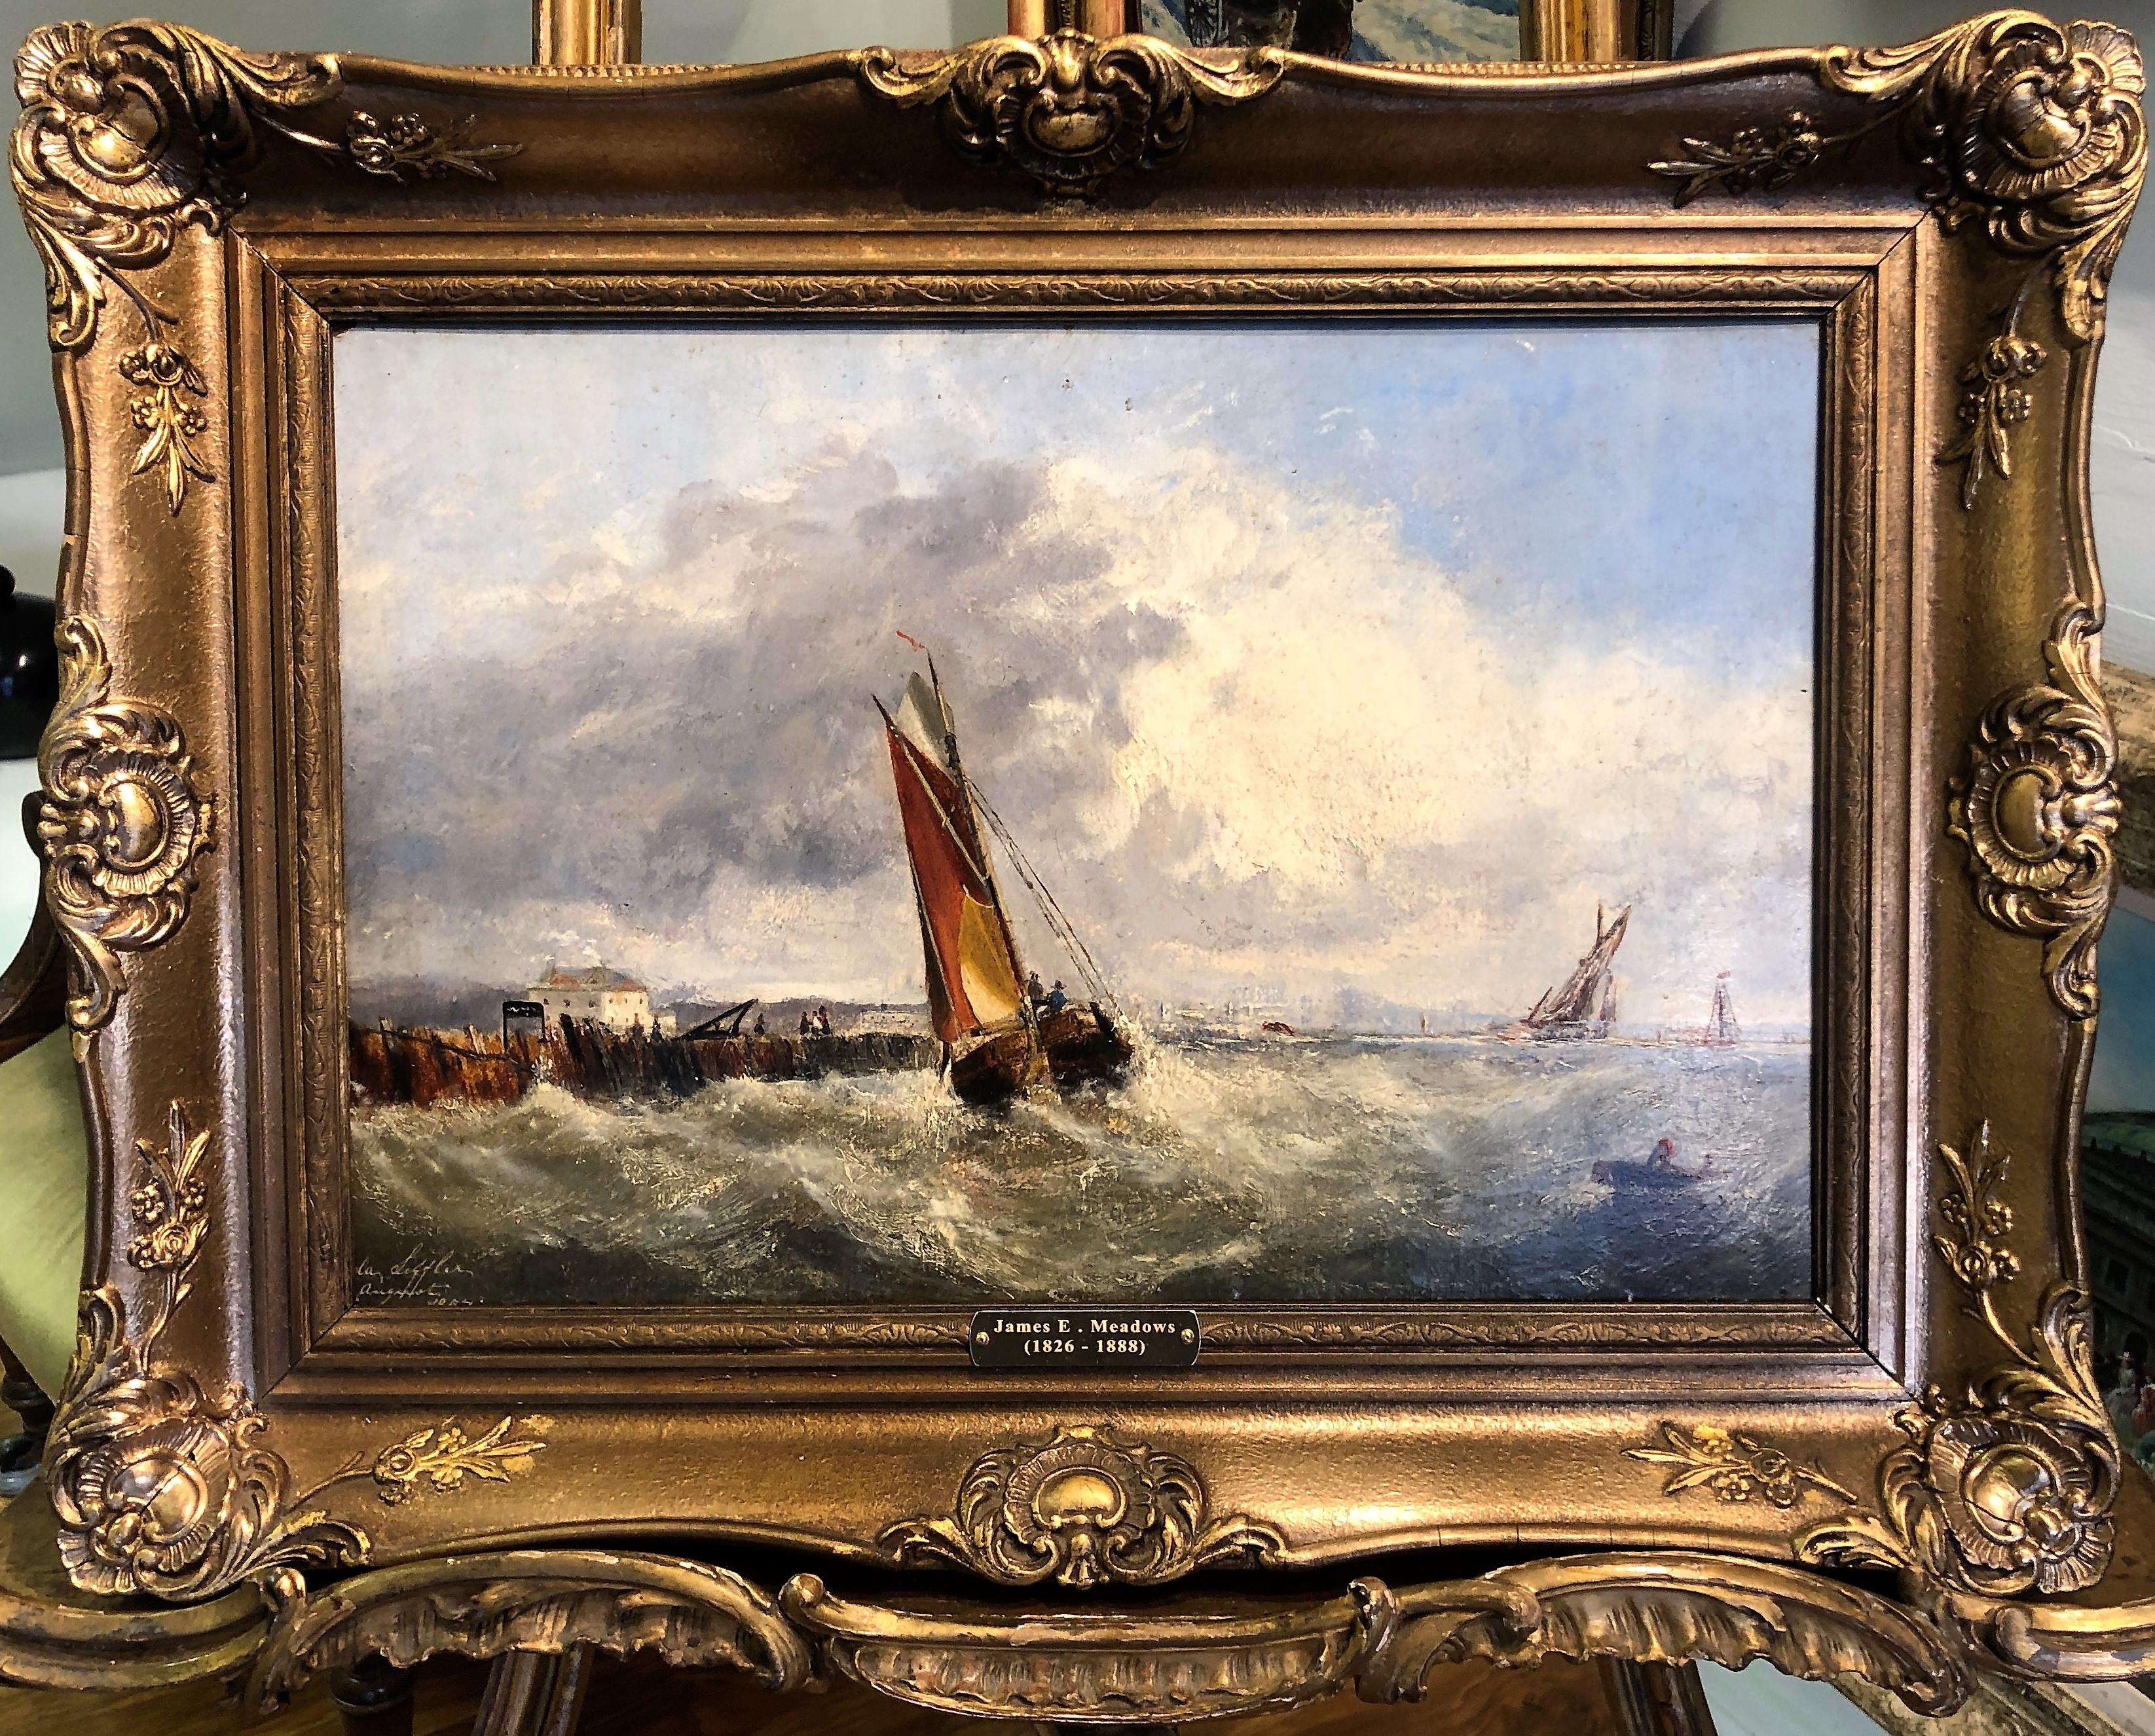 OLD MASTER OIL PAINTING High Quality 19th CENTURY Stormy Seas Gold Gilt Frame - Painting by James Edward Meadows